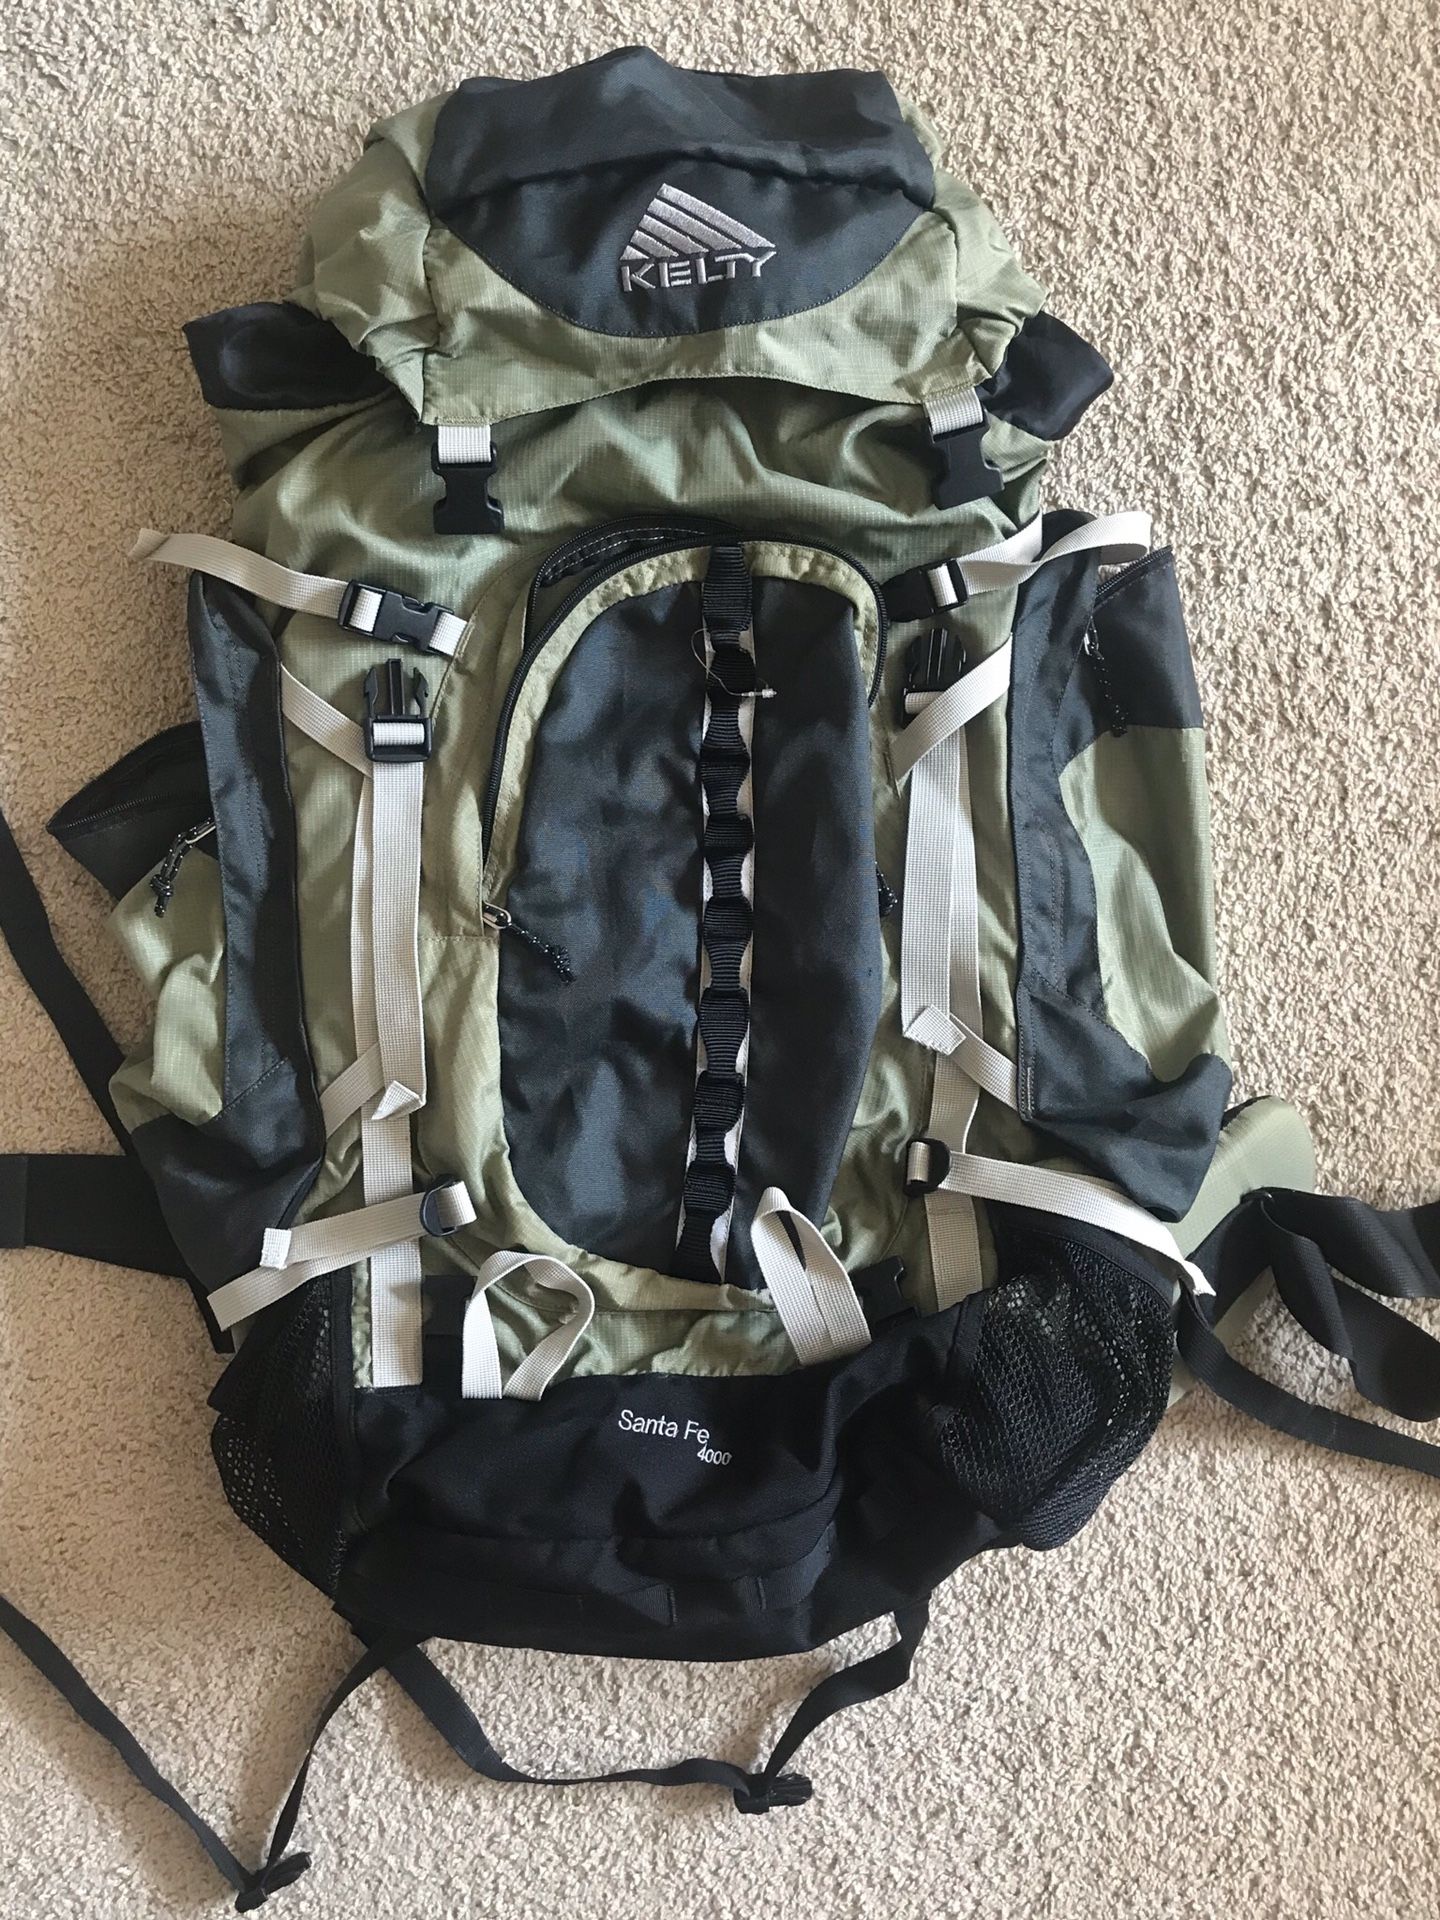 Kelty hiking camping backpack